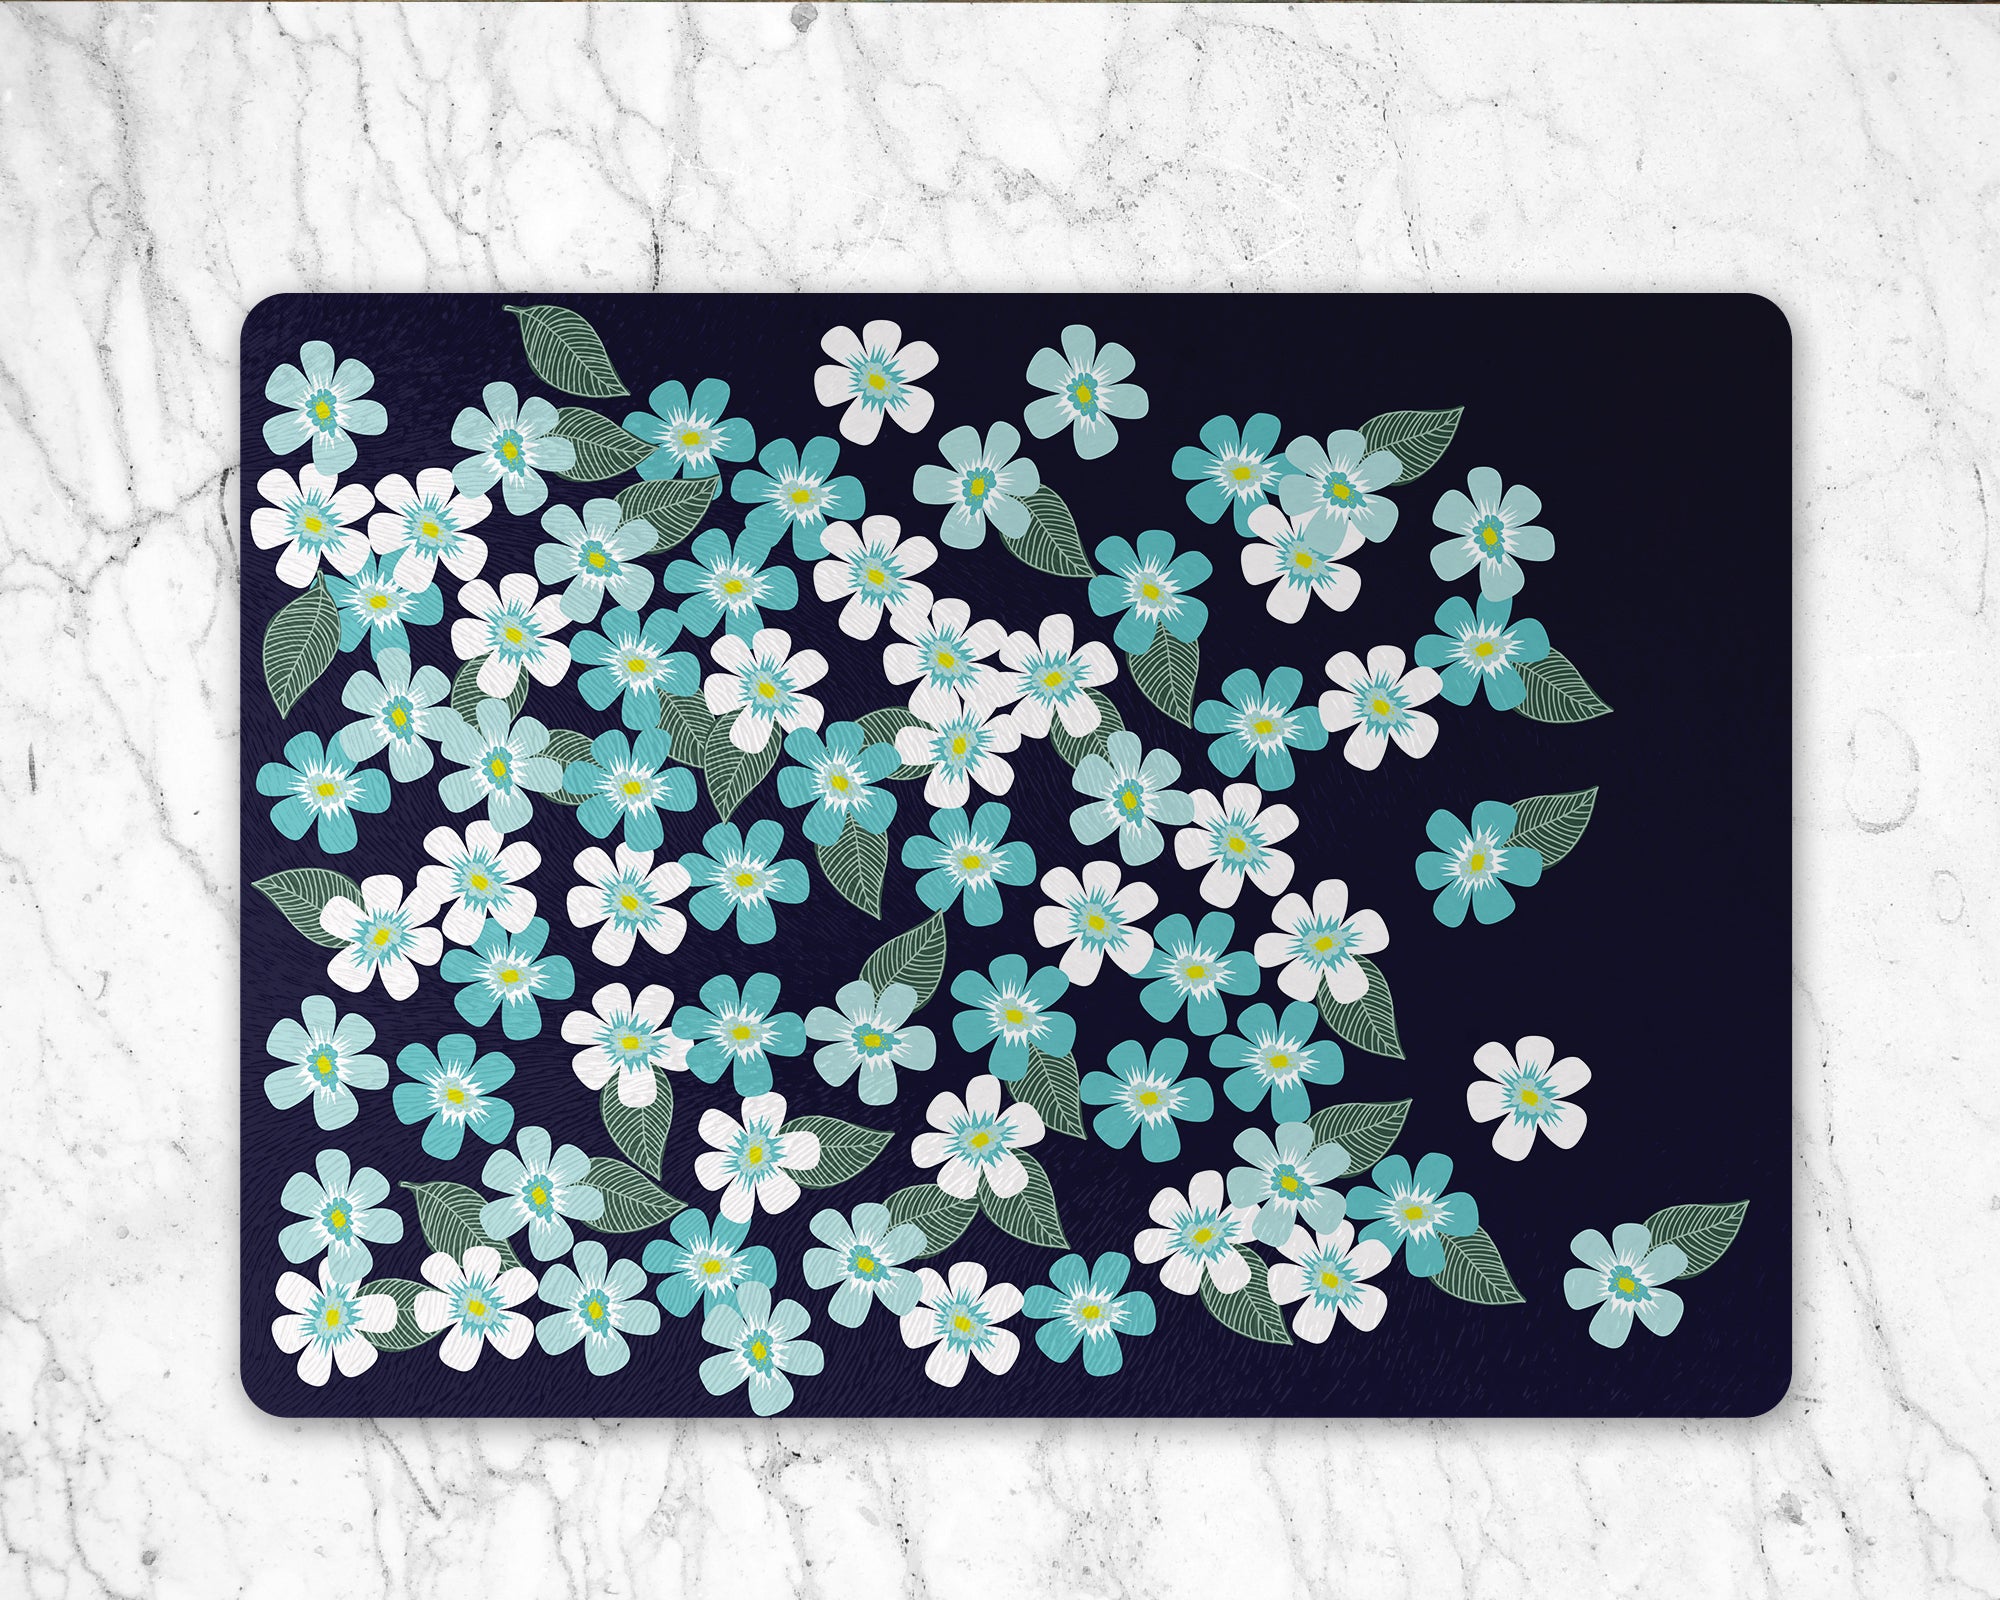 Floating Flowers Glass Cutting / Serving Board